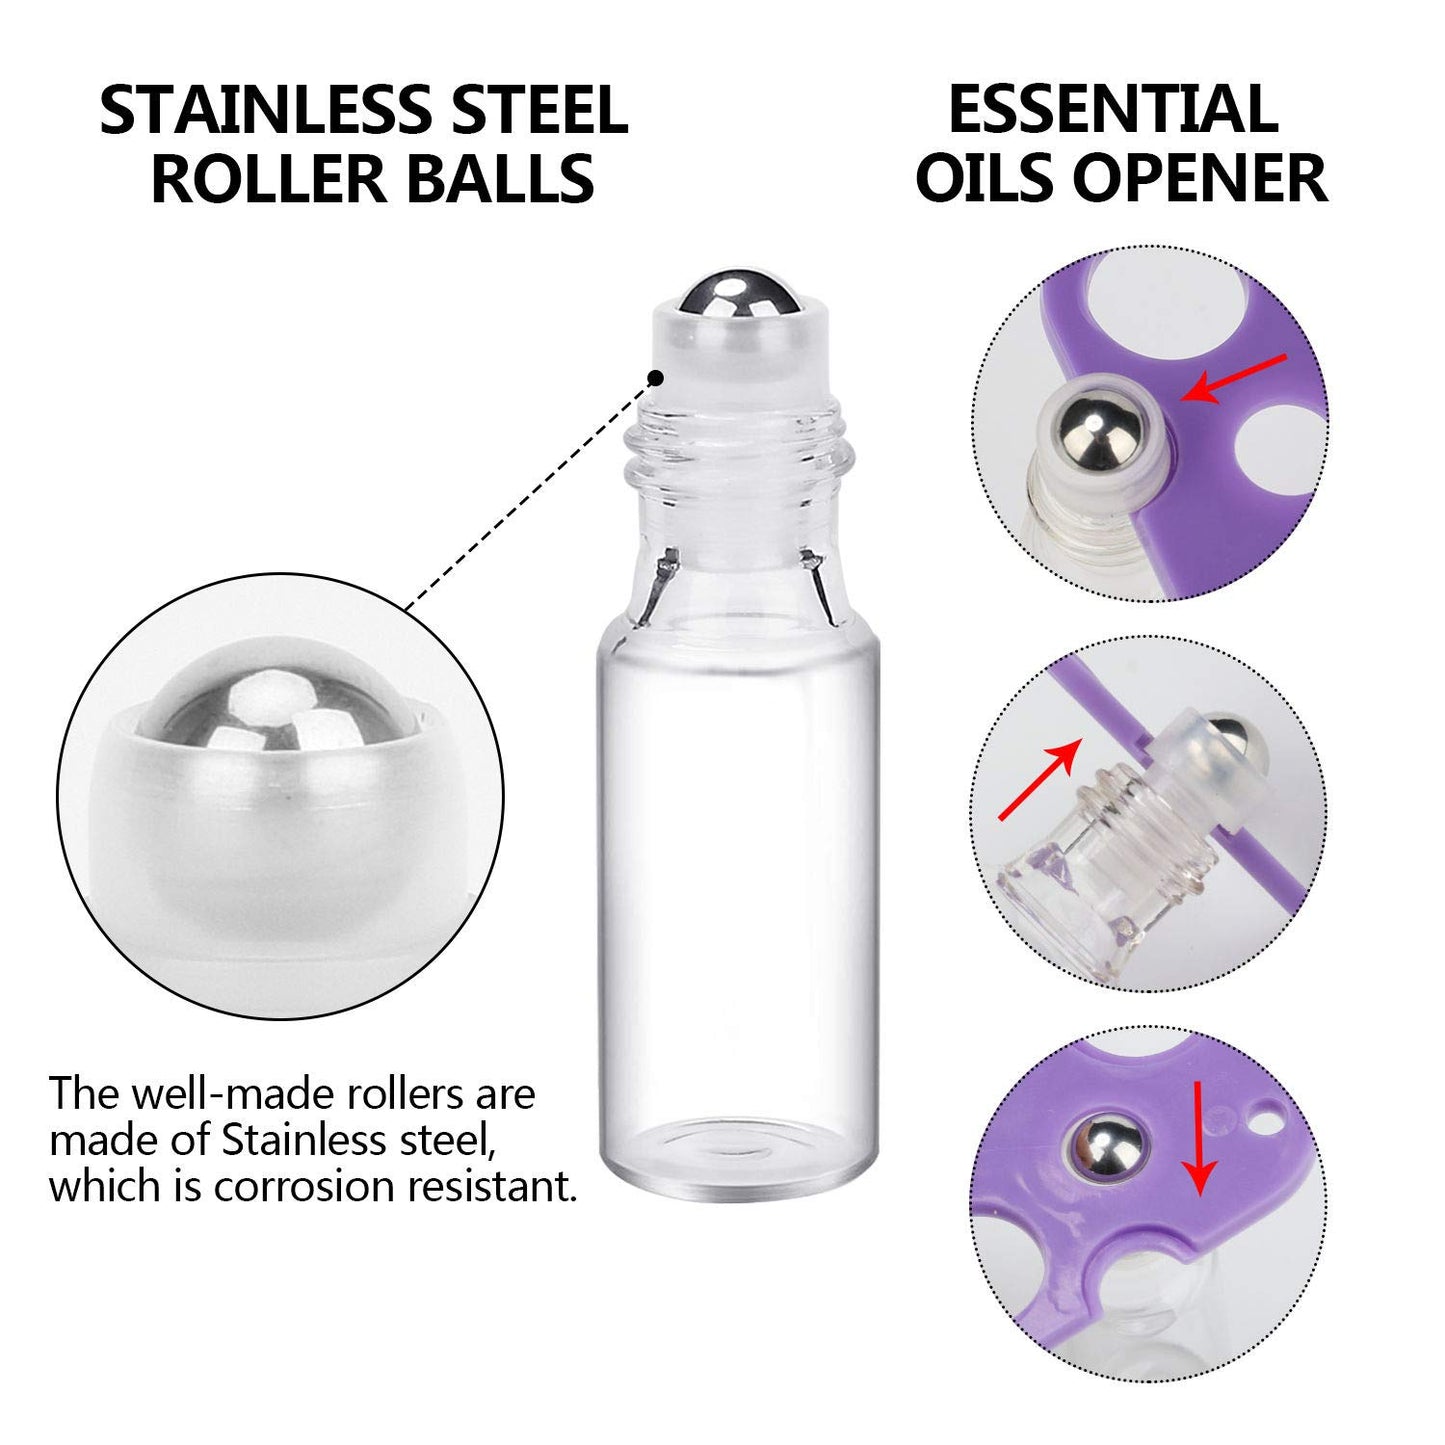 Easytle Essential Oil Roller Bottles 24 Pack 5ml Clear Glass Roller Bottles for Oils (96 Pieces Labels, 2 Opener, 4 Funnels, 4 Dropper) Roll on Bottles with Stainless Steel Roller Balls and Caps